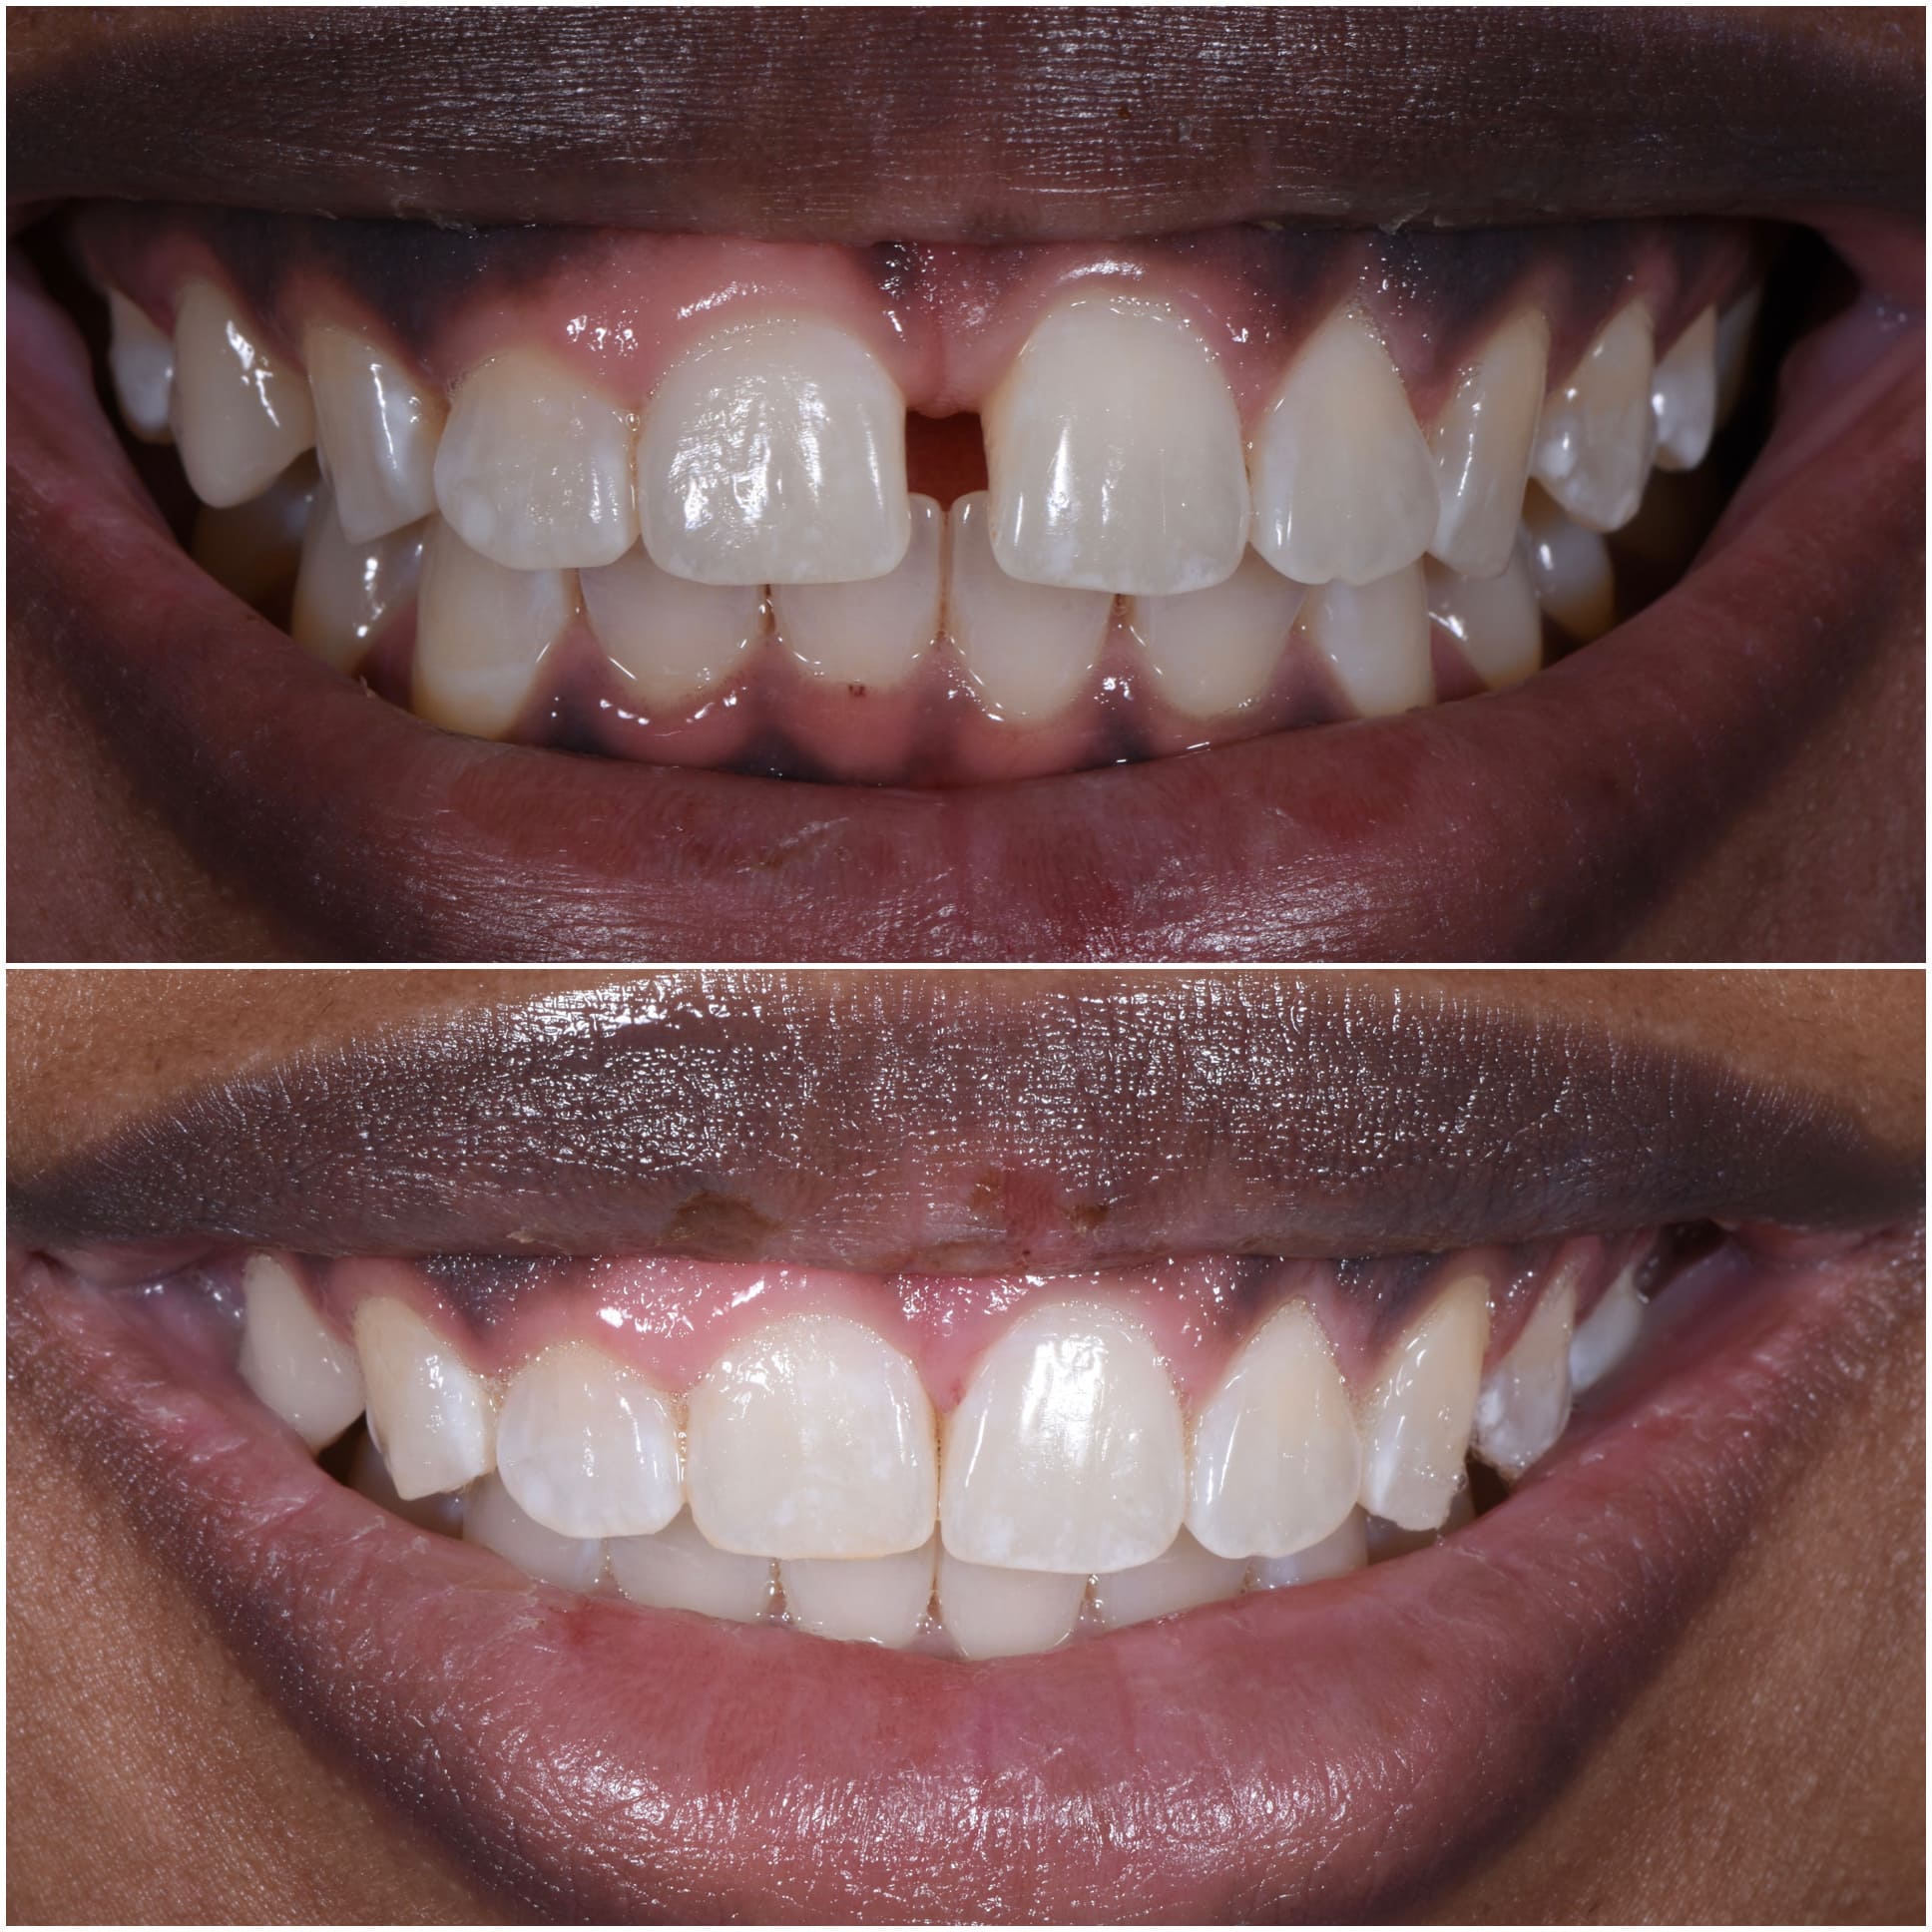 Teeth Before and After the Accelerated Orthodontics